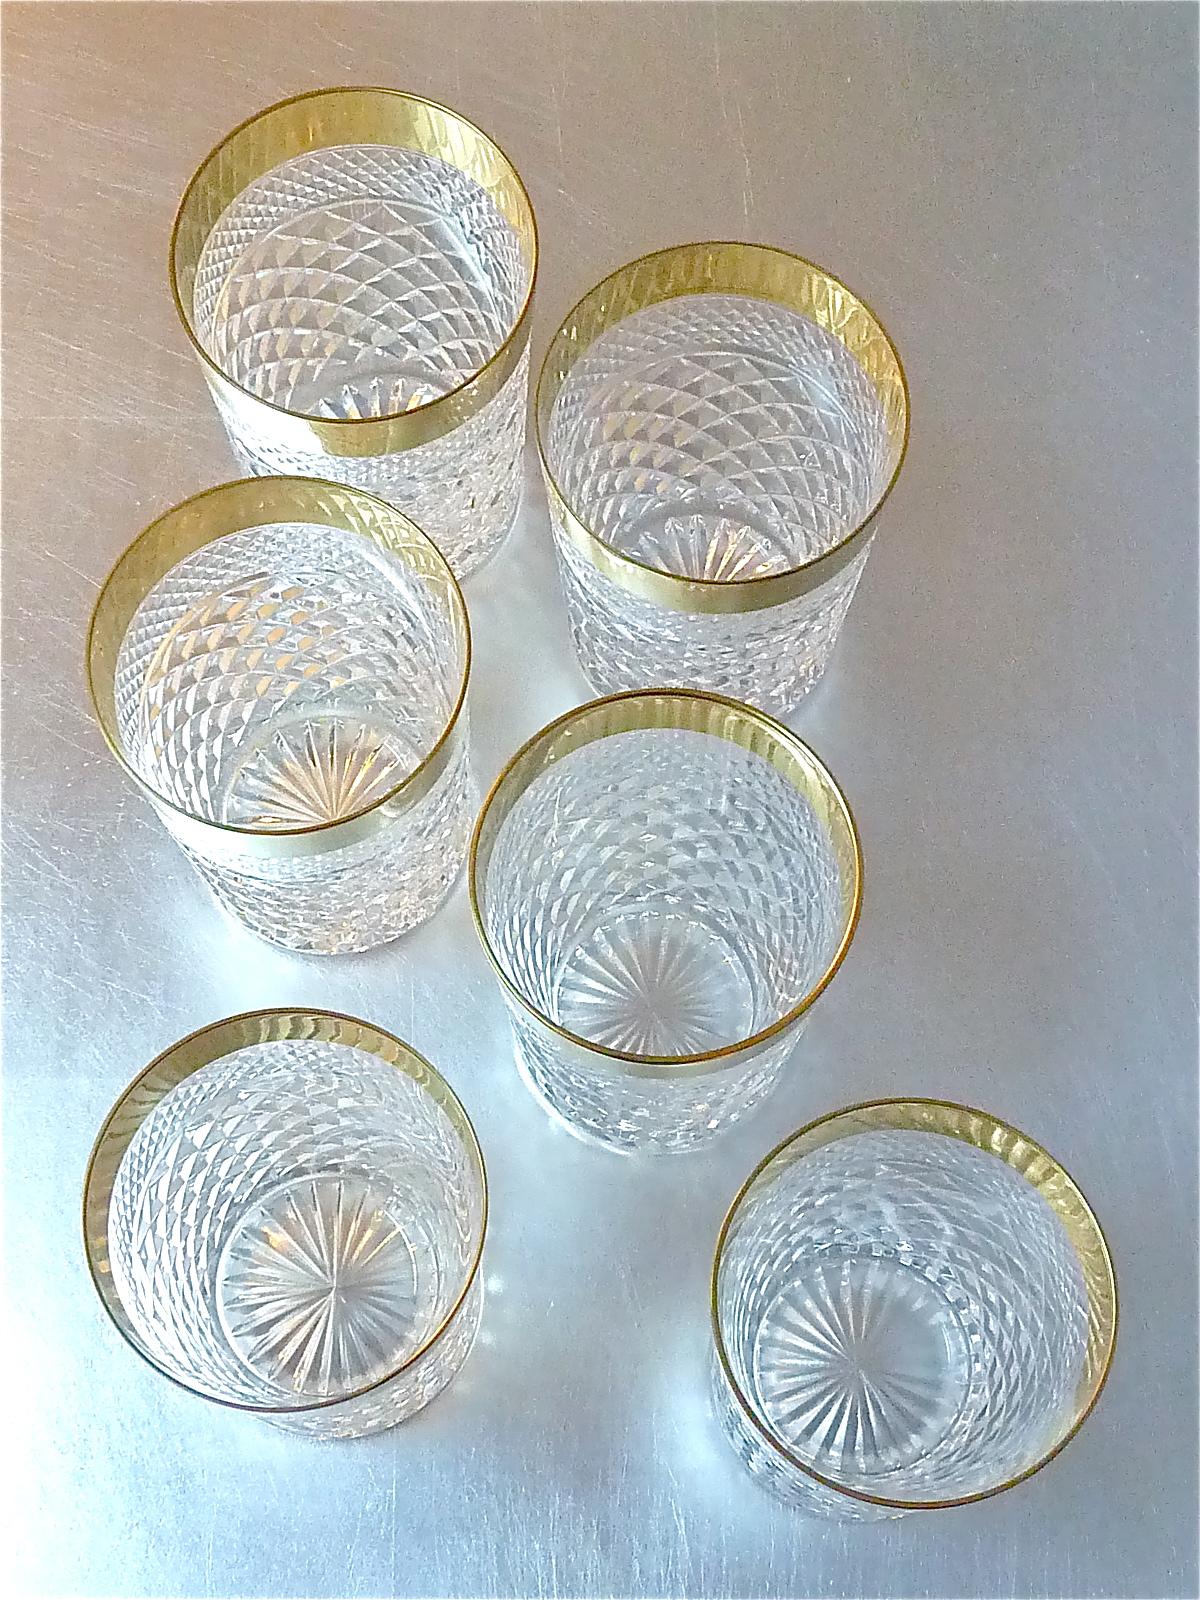 Precious 6 Water Glasses Gold Crystal Glass Tumbler Josephinenhuette Moser For Sale 5